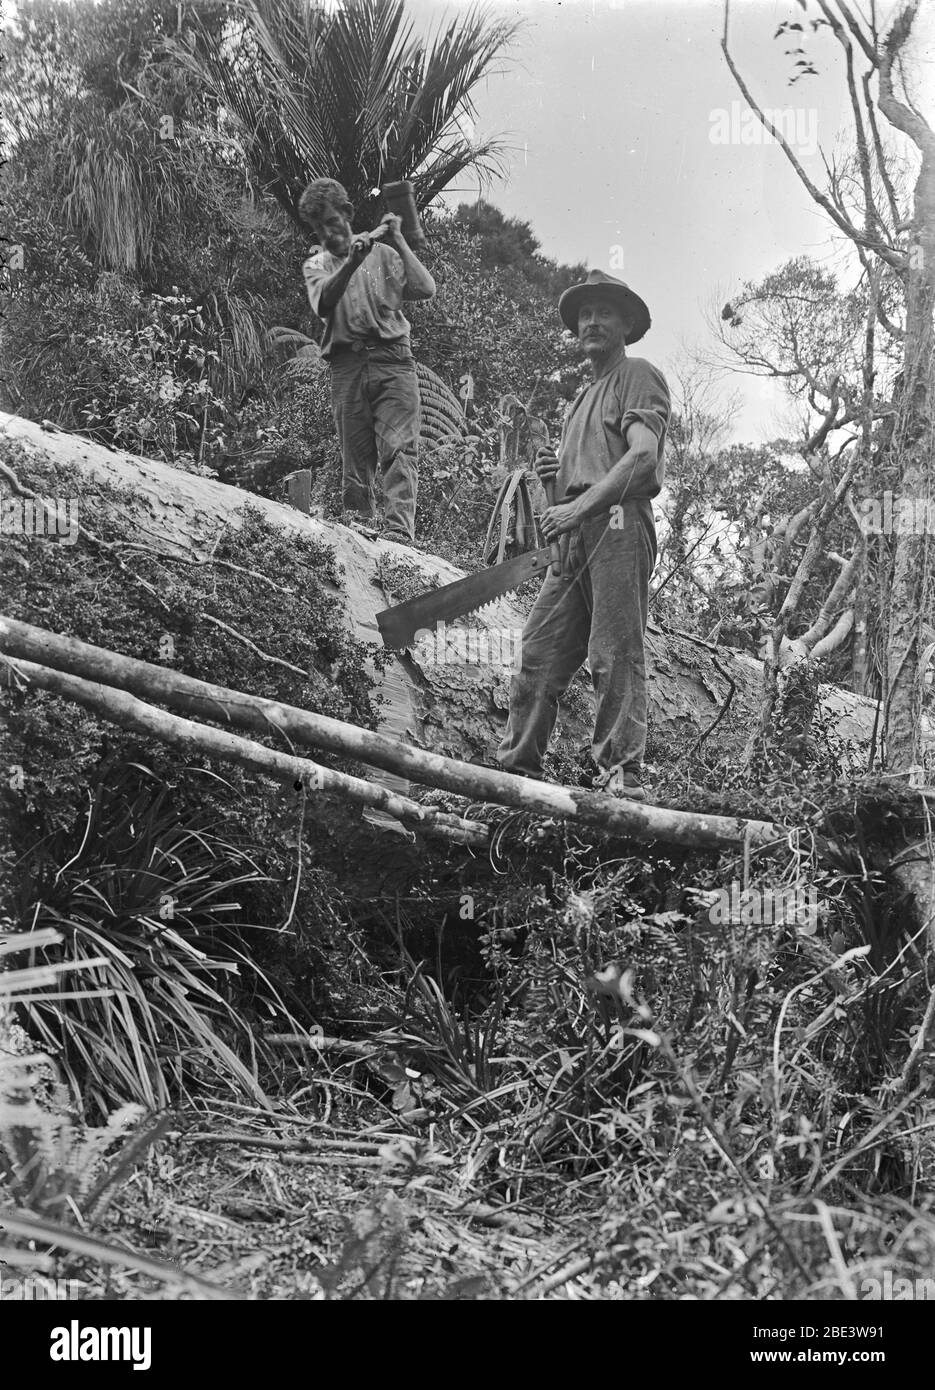 Men use a crosscut saw to shorten a fallen kauri tree in a stand of native bush near Piha in the North Island of New Zealand, circa 1915, by photographer Albert Percy Godber Stock Photo